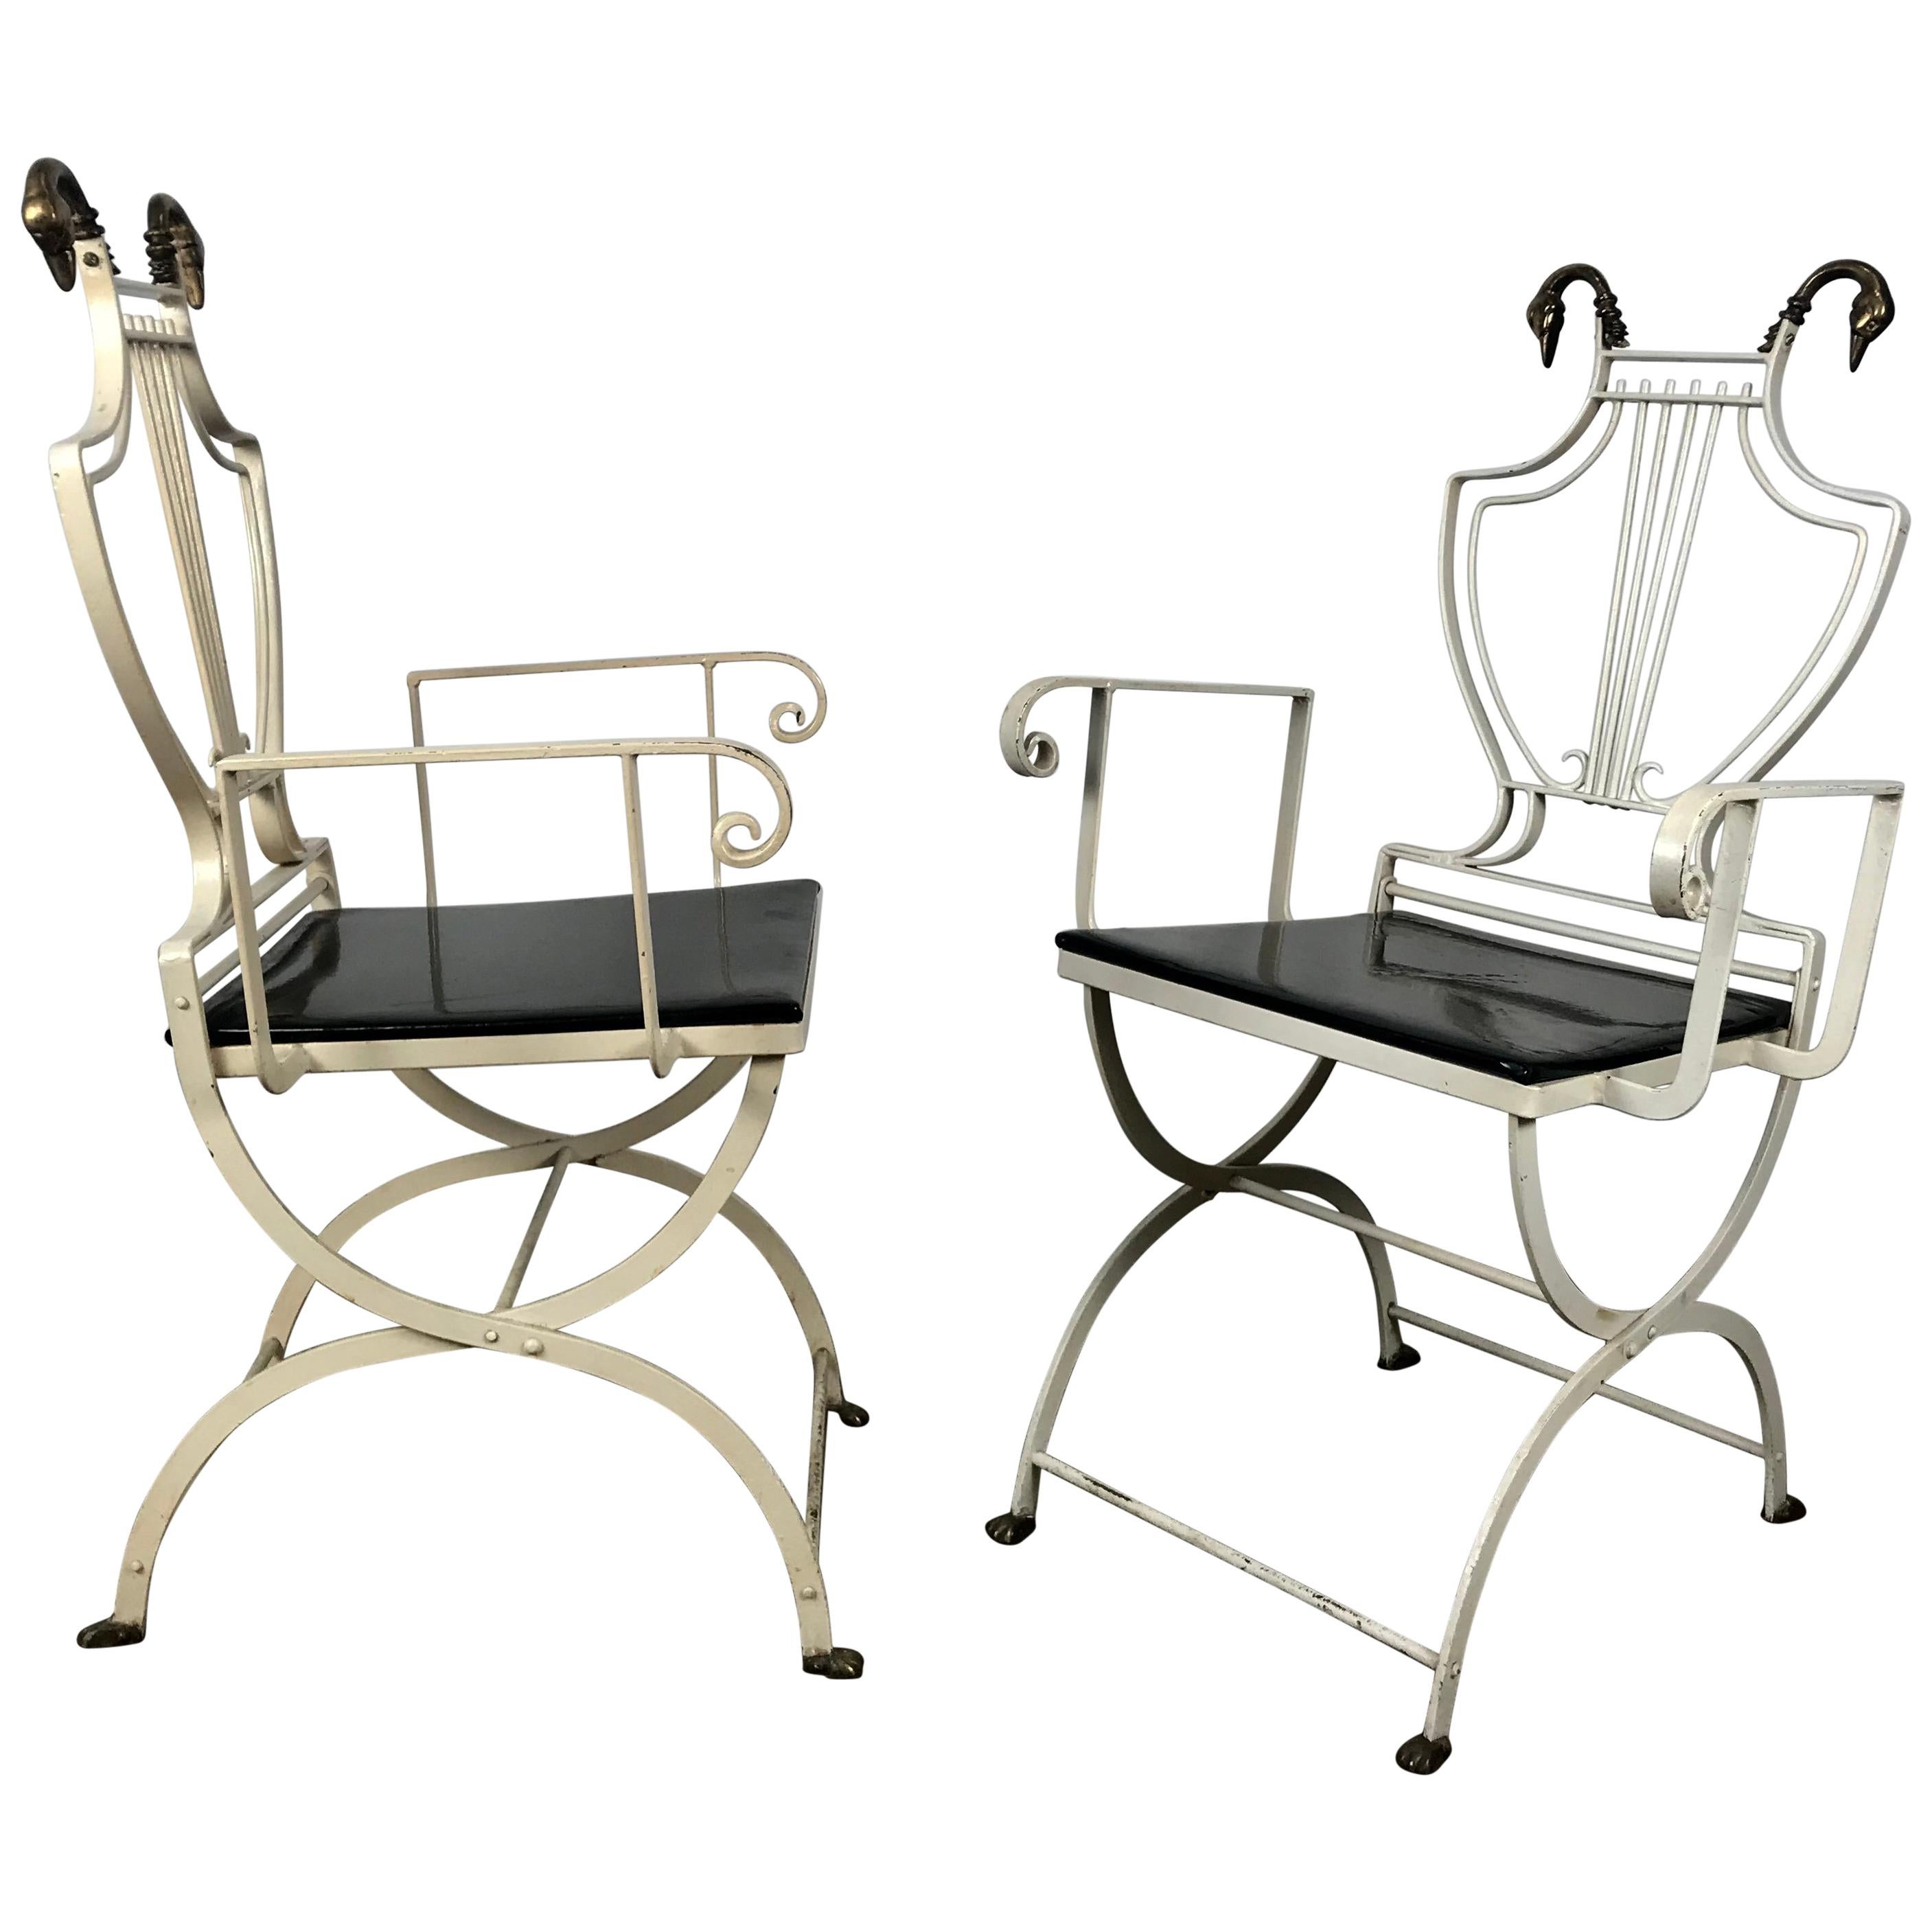 Pair of Iron and Brass Italian Lyre Back Armchairs with Swans, Grosfeld House